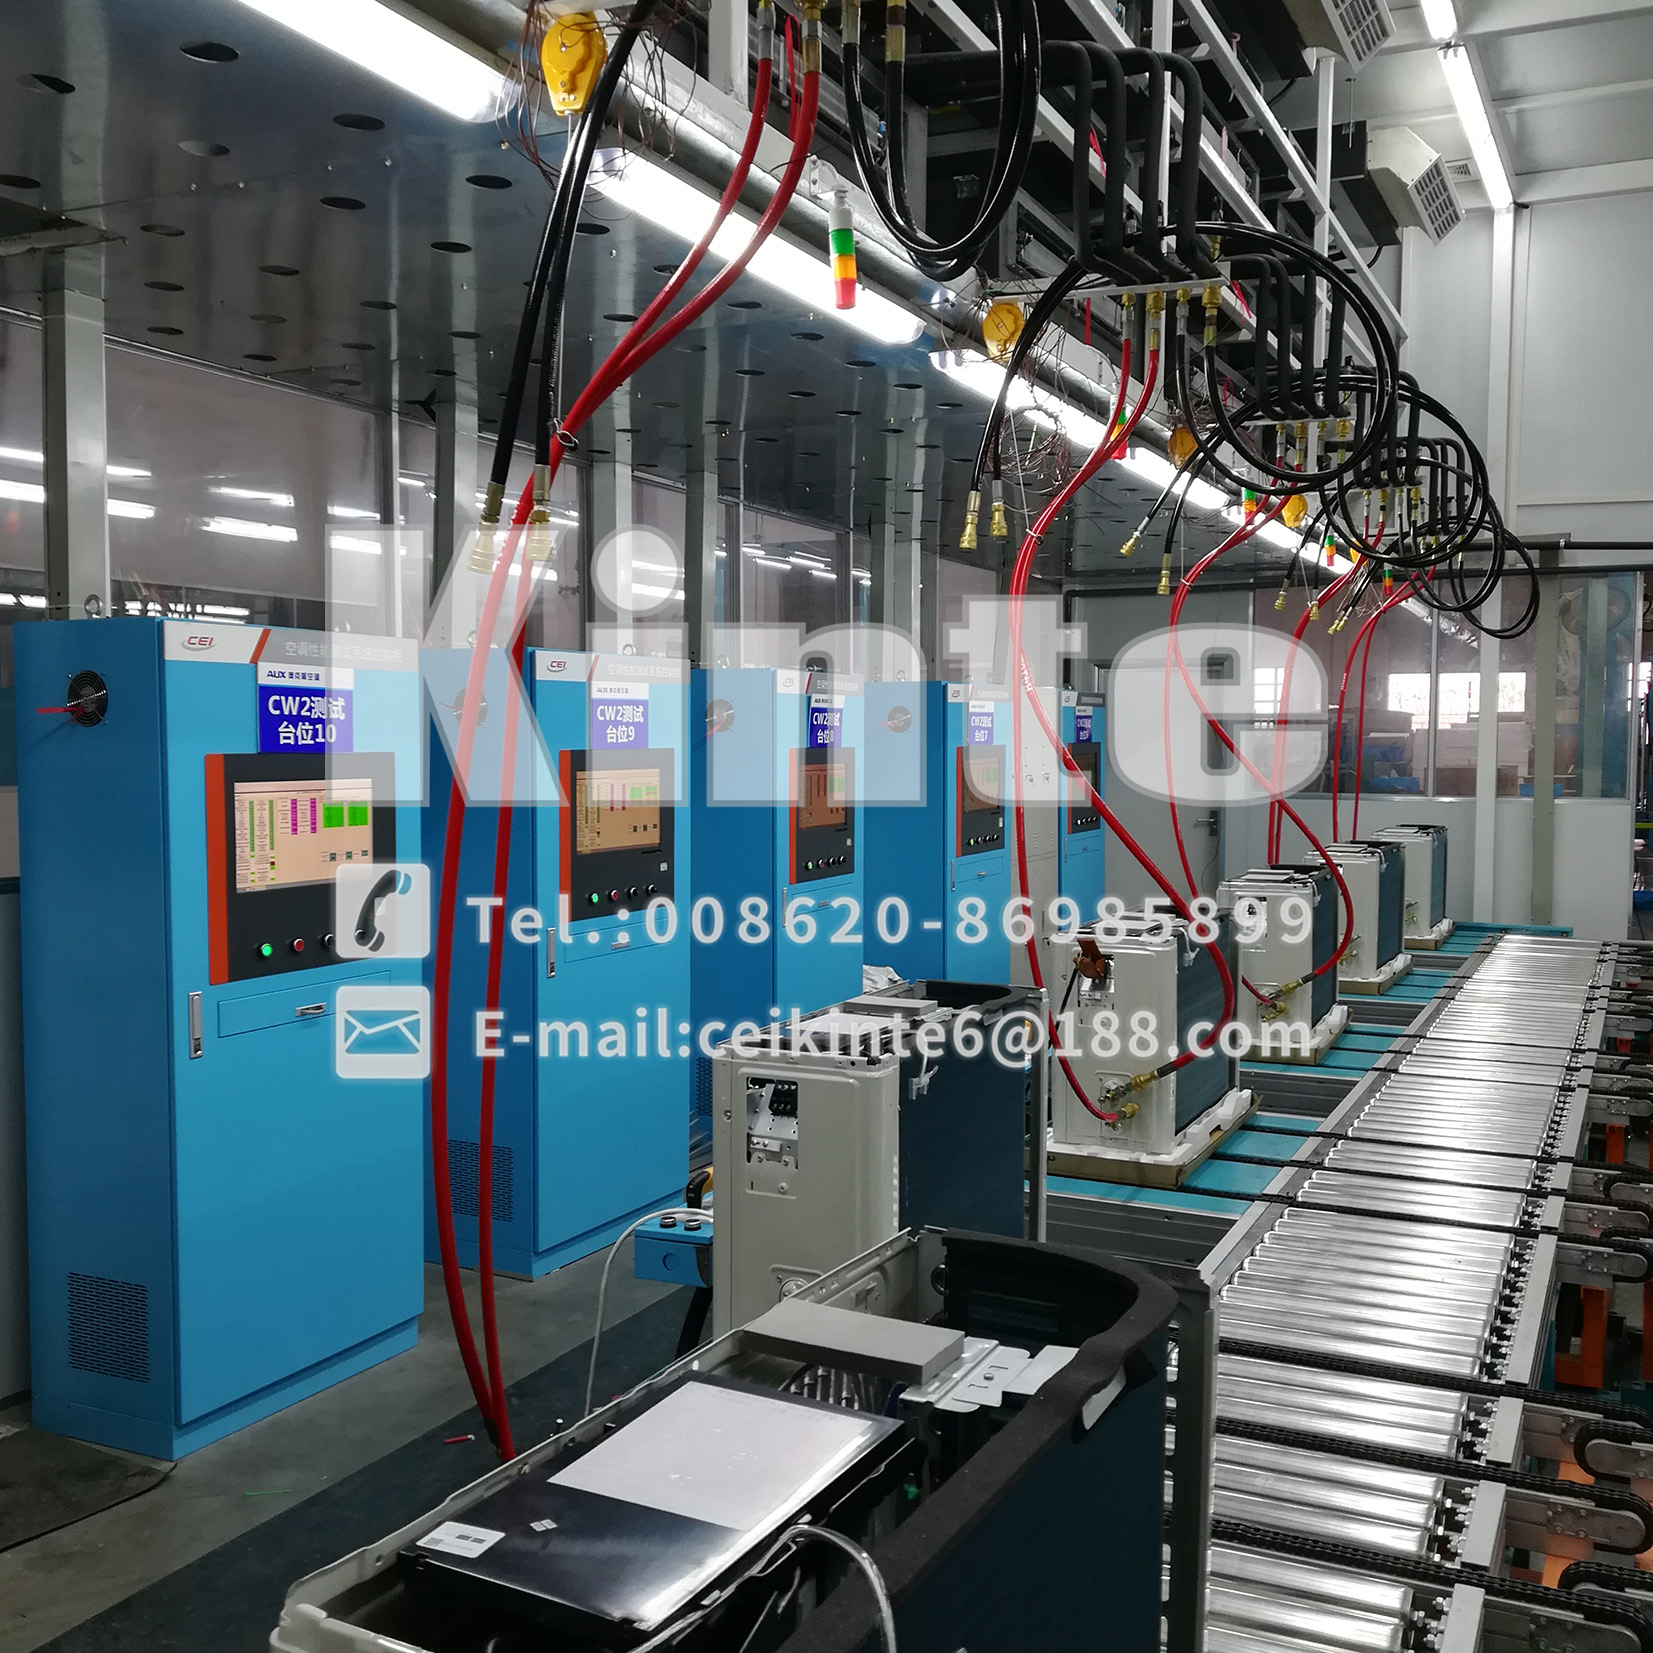 Commercial air conditioner performance testing equipment